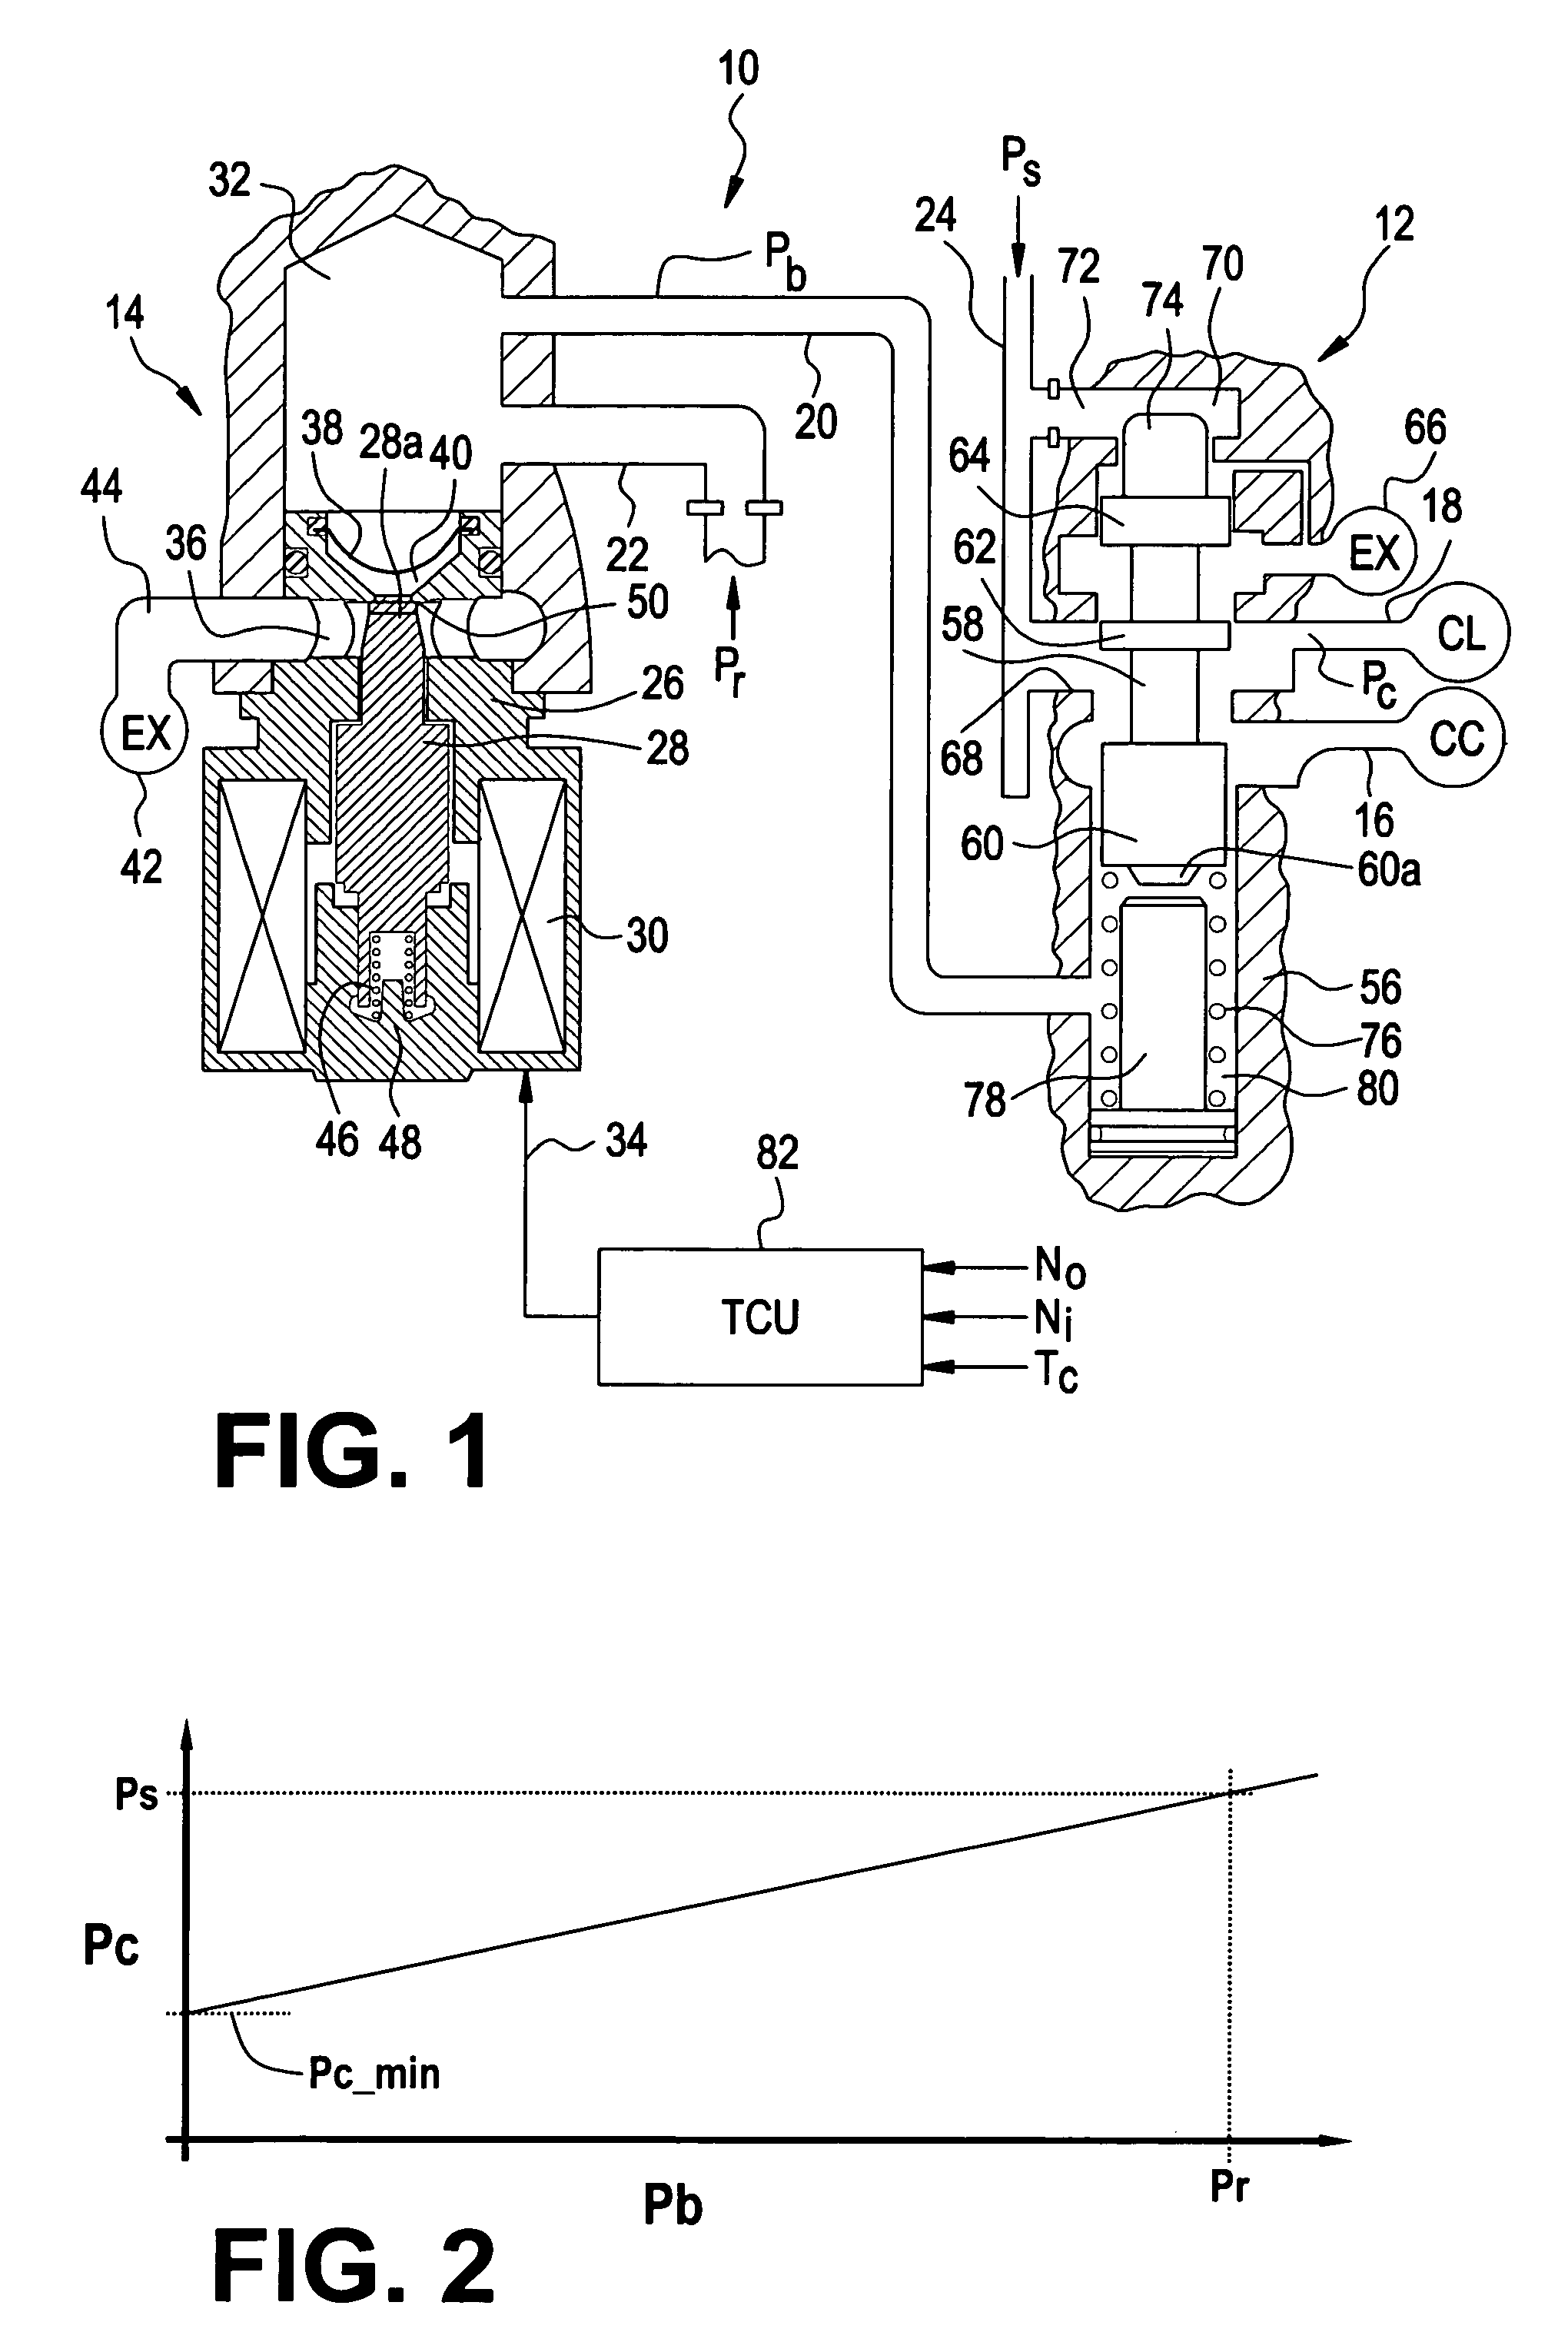 Method of automatically flushing debris from an electrically-operated hydraulic valve